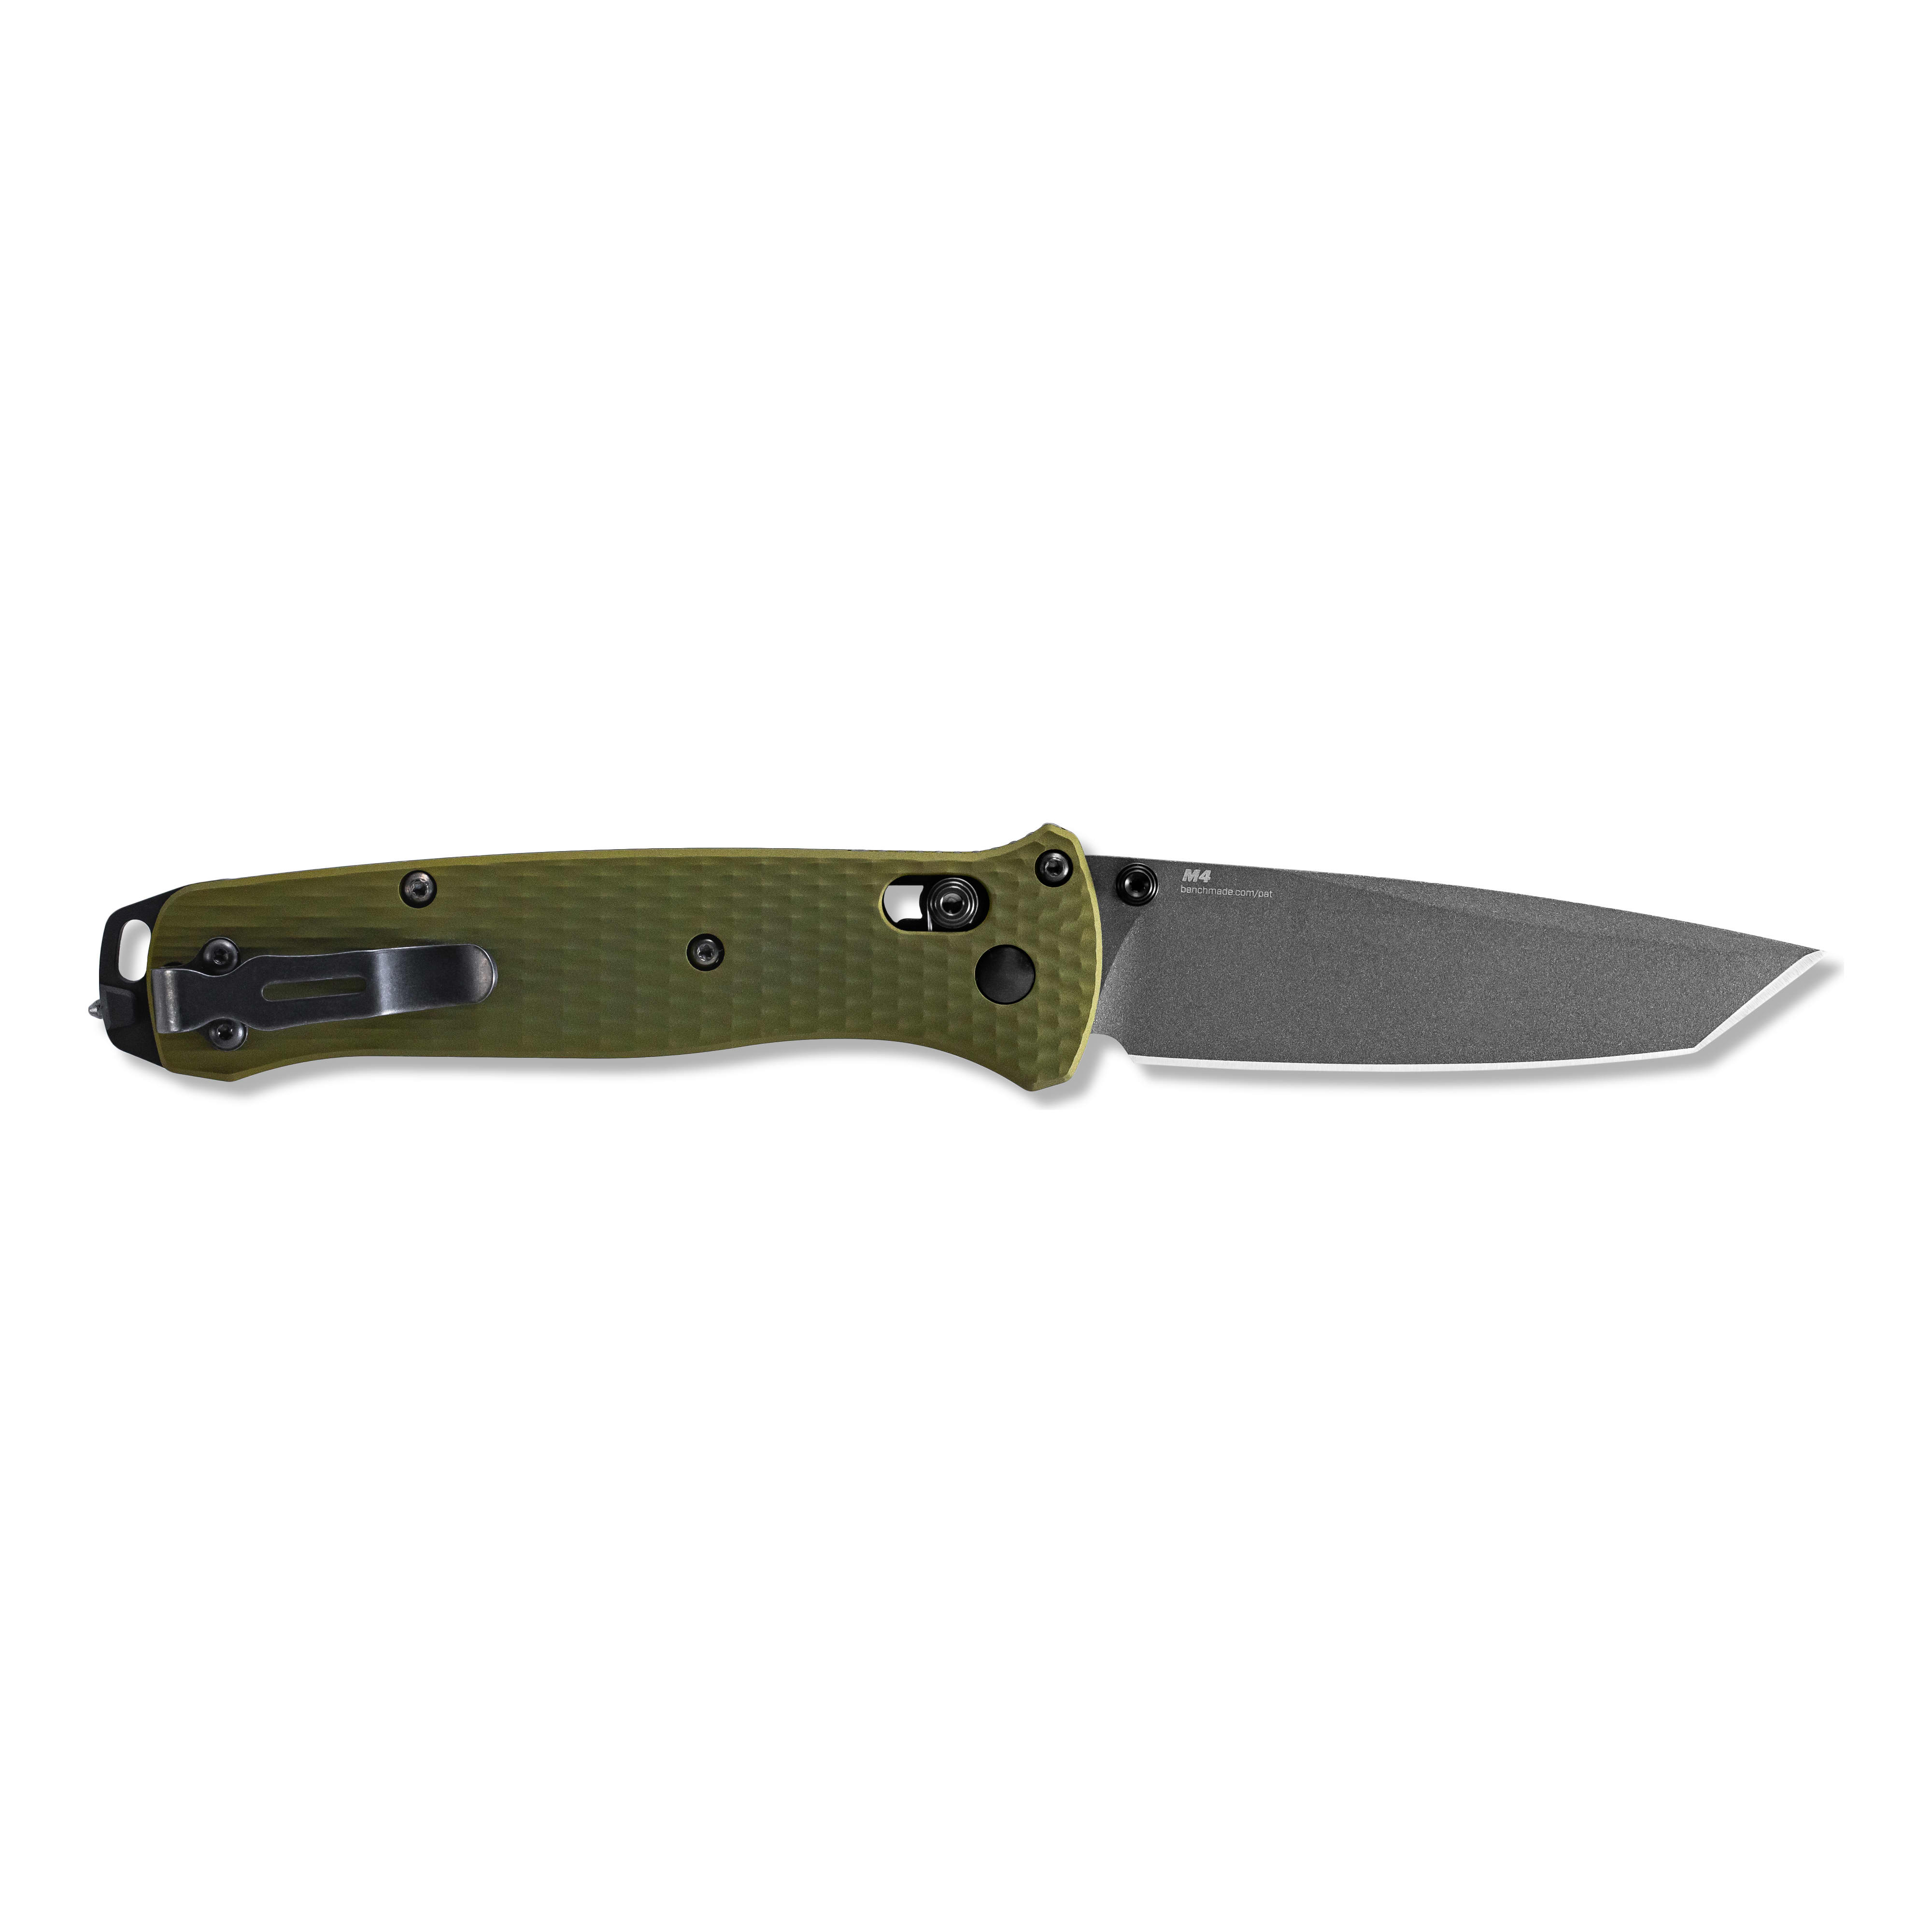 Benchmade® 537GY-1 Bailout Folding Knife - Unfolded View - Opposite View